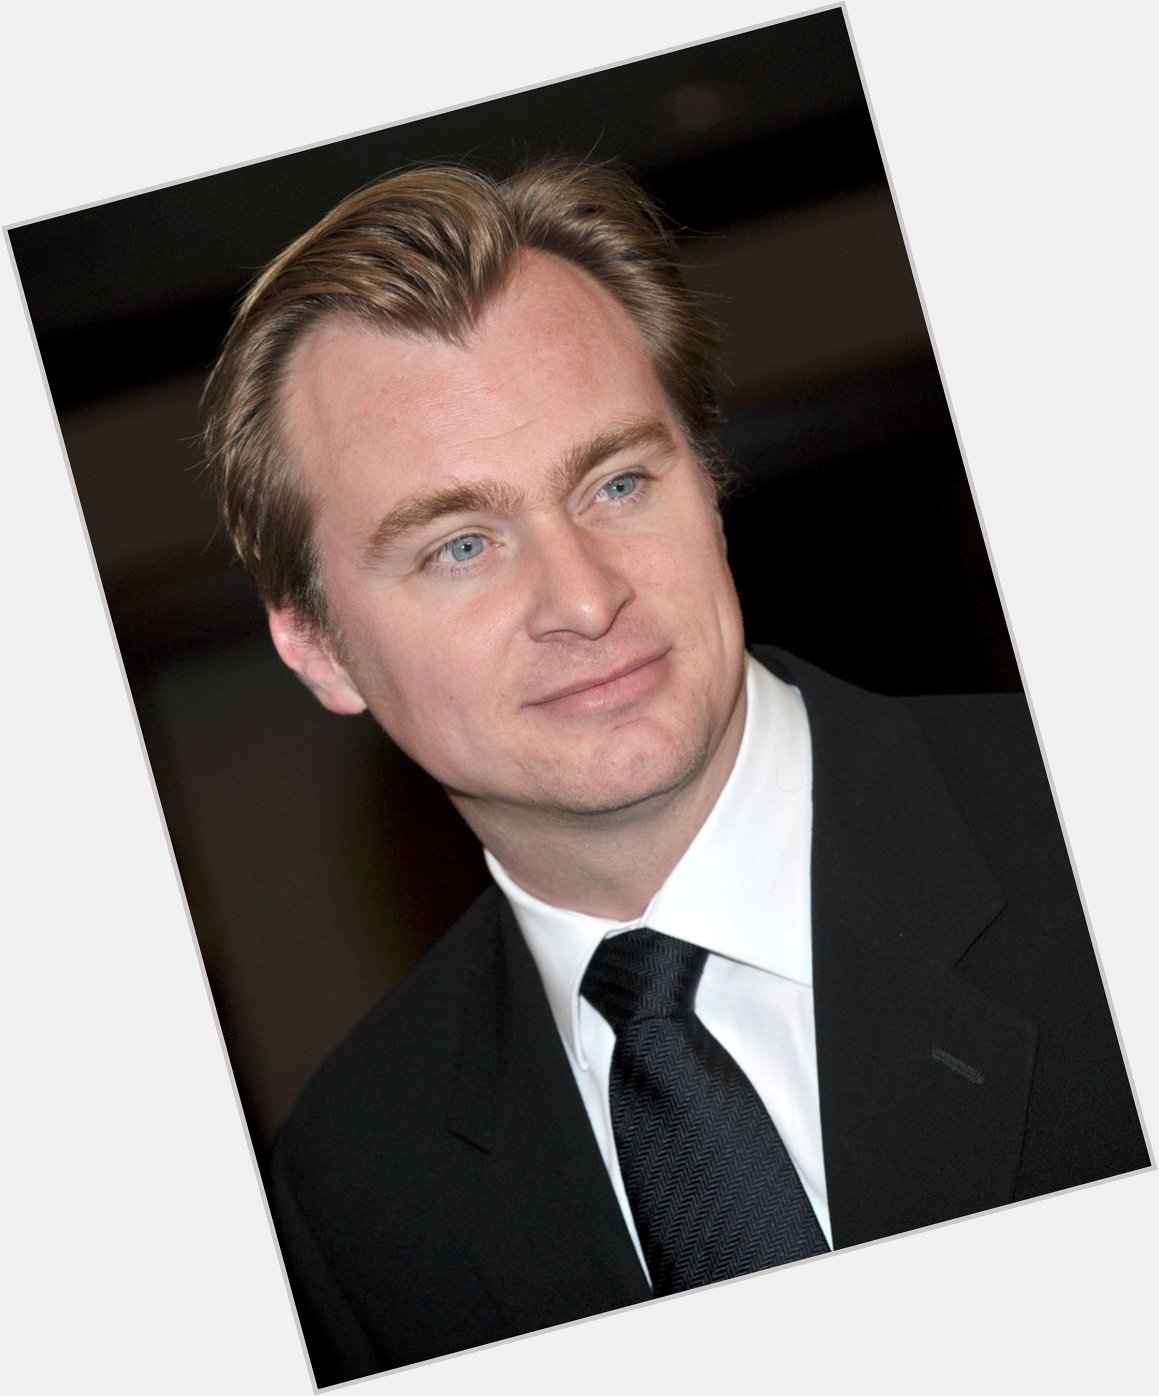 Happy birthday to Christopher Nolan 
The legend director in the world 